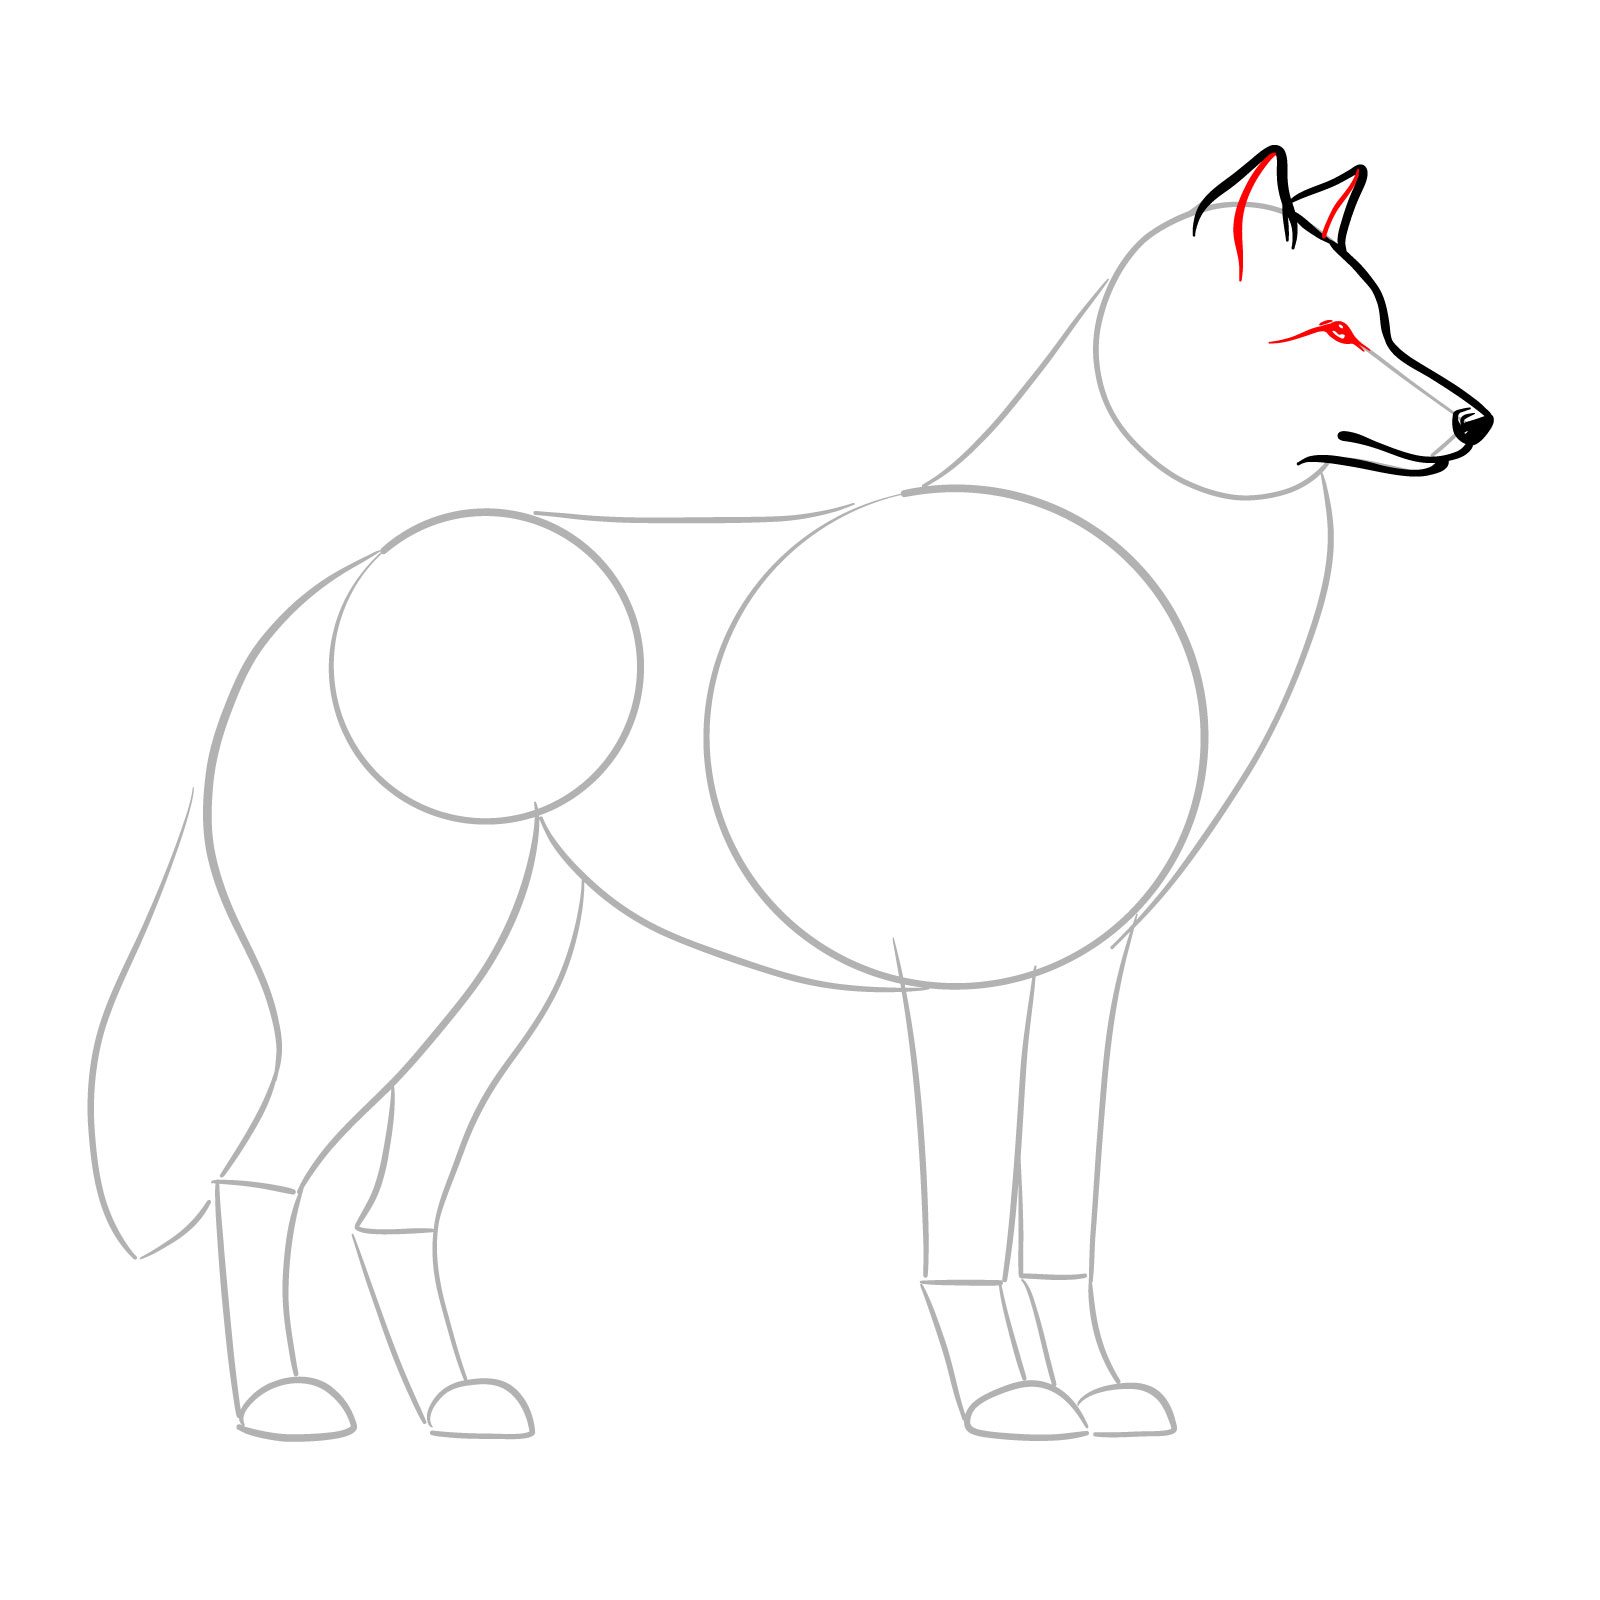 Adding the eye and detailing the ears in a step-by-step wolf side view drawing - step 06